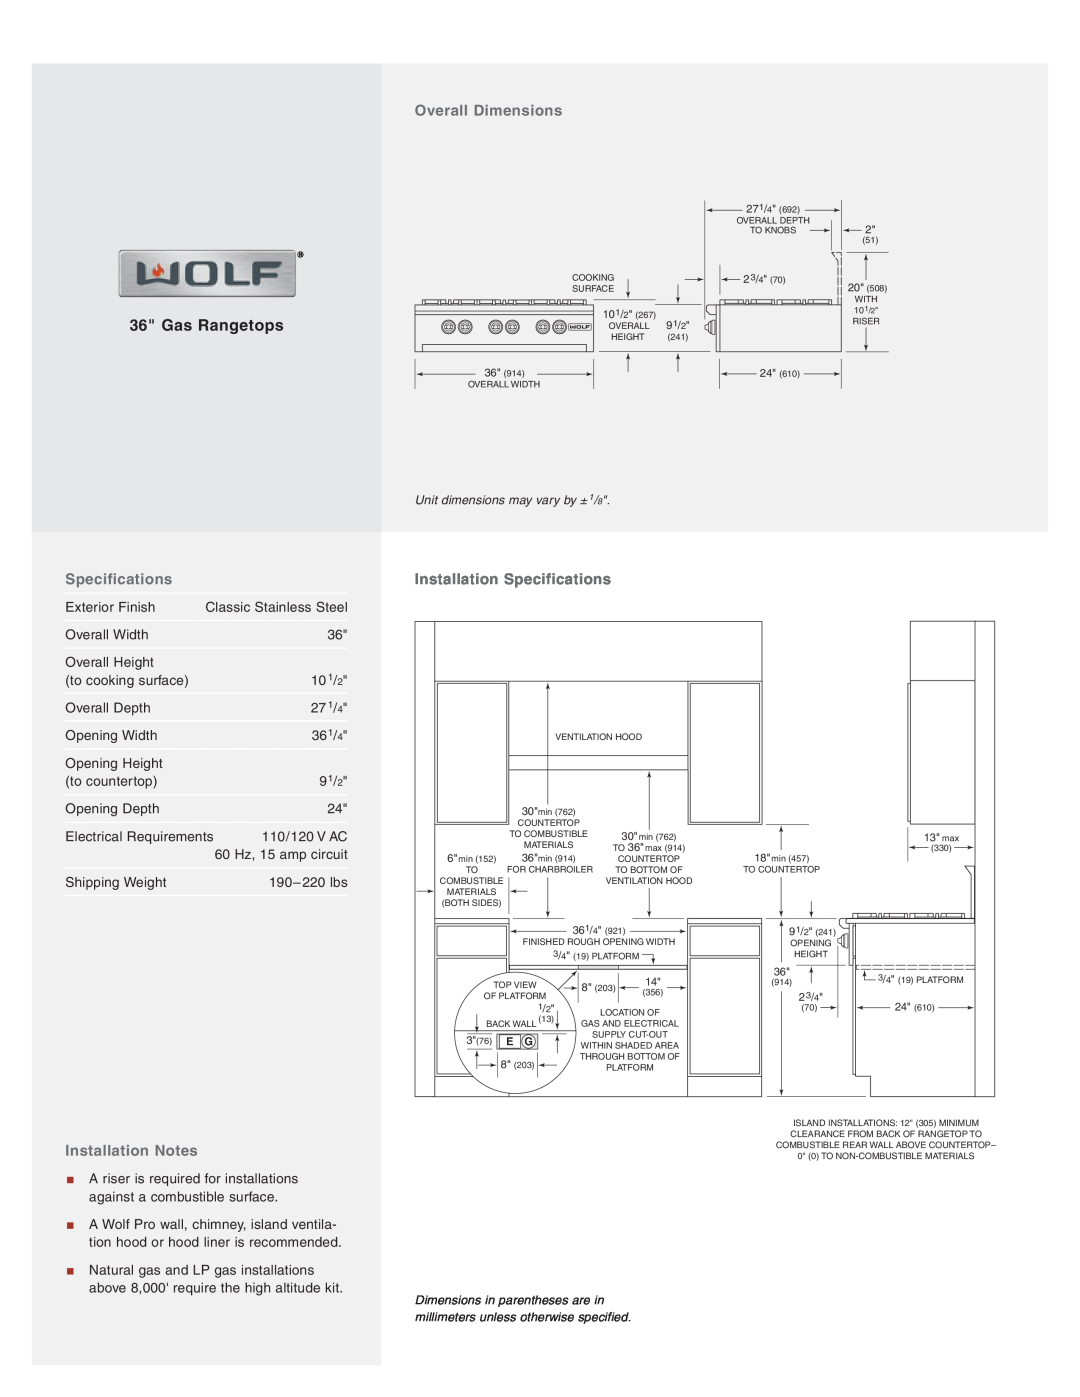 Wolf Appliance Company RT362F manual Overall Dimensions, Installation Specifications, Installation Notes, Gas Rangetops 